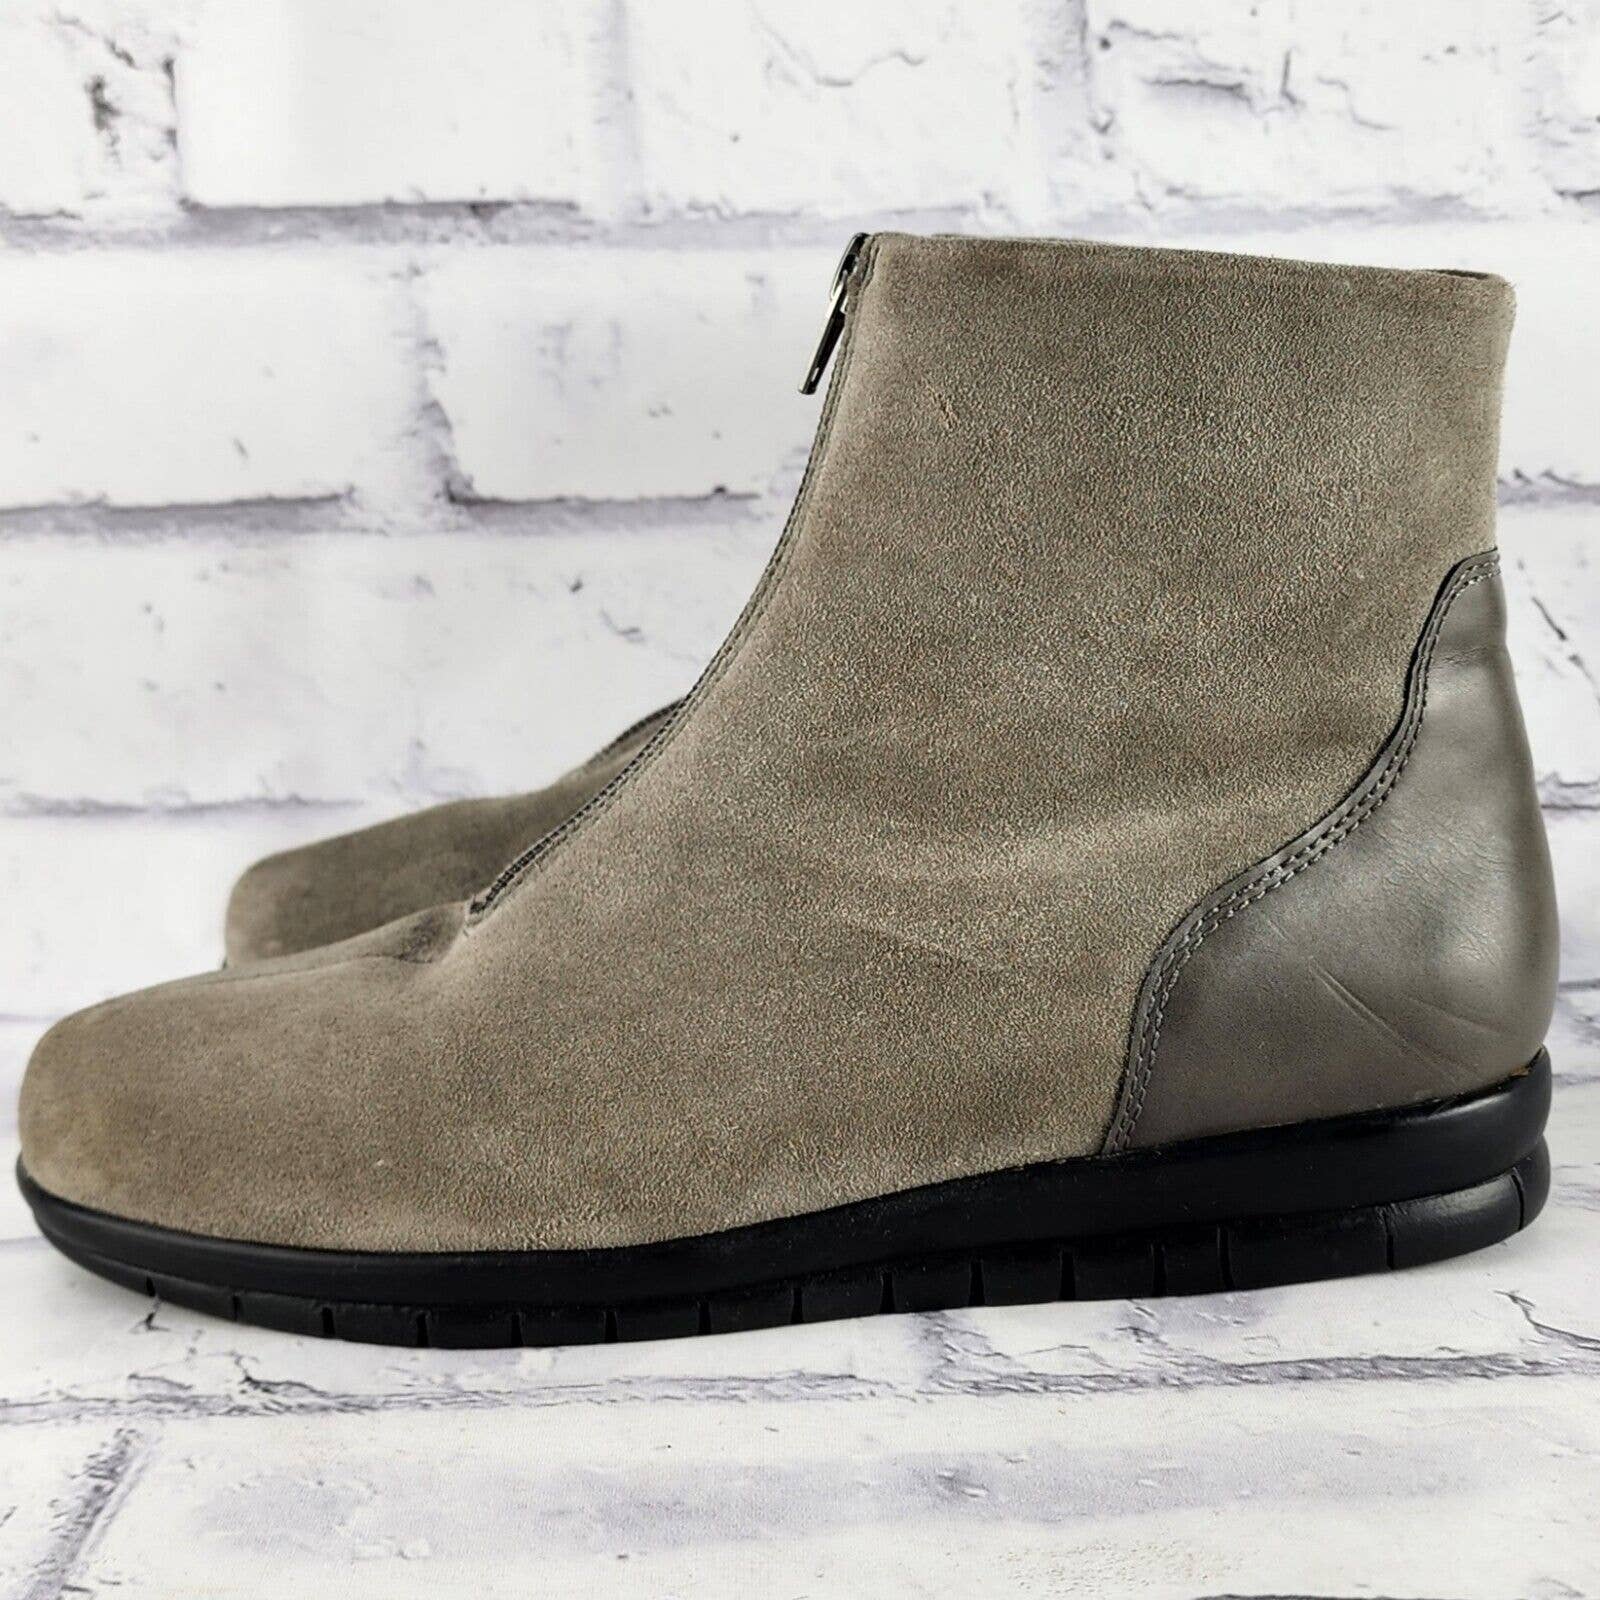 G.H. Bass & Co Carissa Ankle Boots Women's Size 6 M Gray Fur Lined Suede